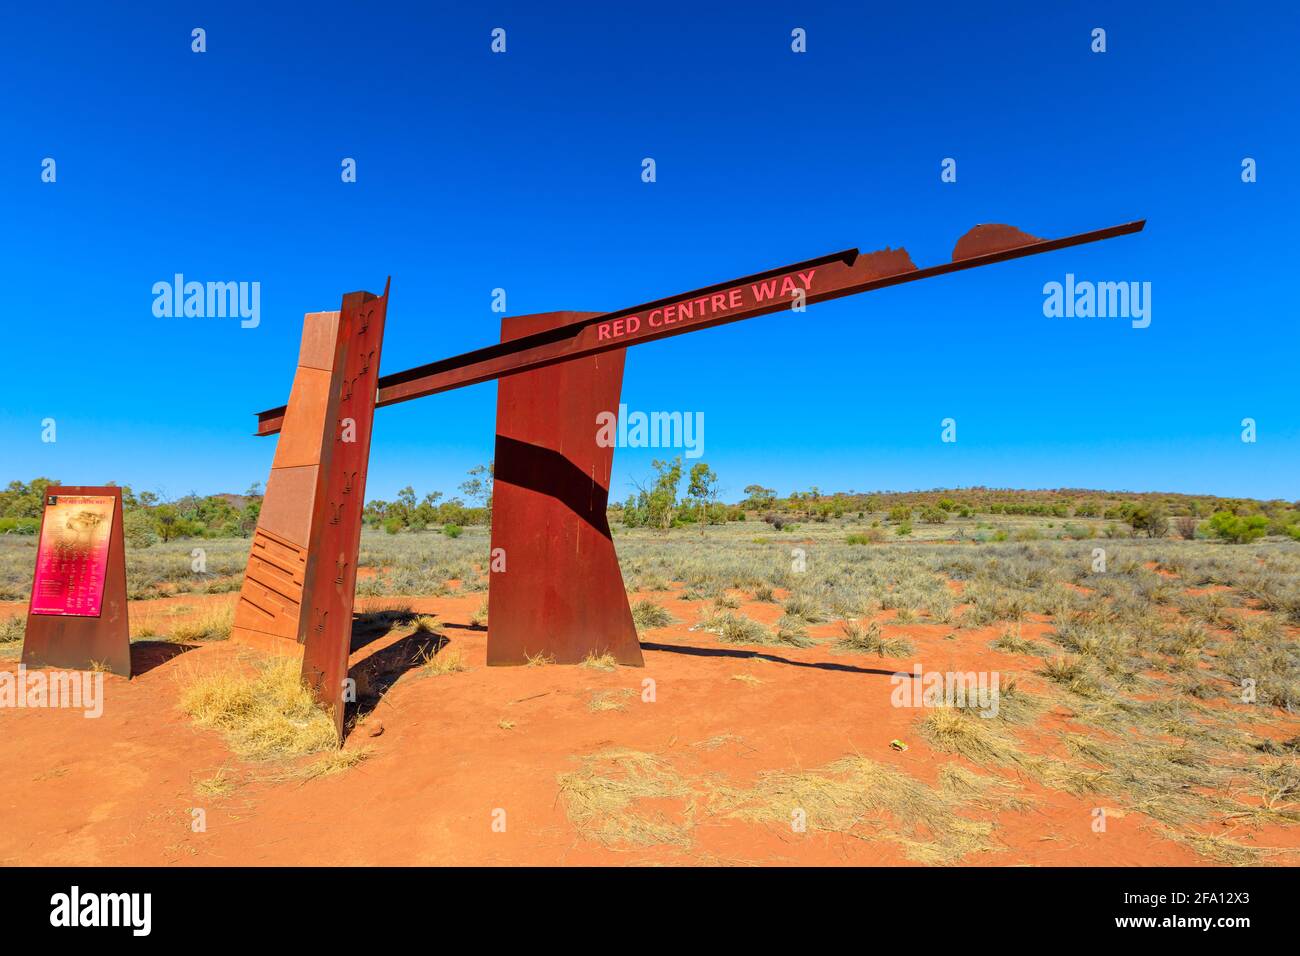 Alice Springs, Northern Territory Outback, Australien - 16. Aug 2019: Red Centre Way-Schild am Larapinta Drive Highway von Alice Springs. Tourismus in Stockfoto